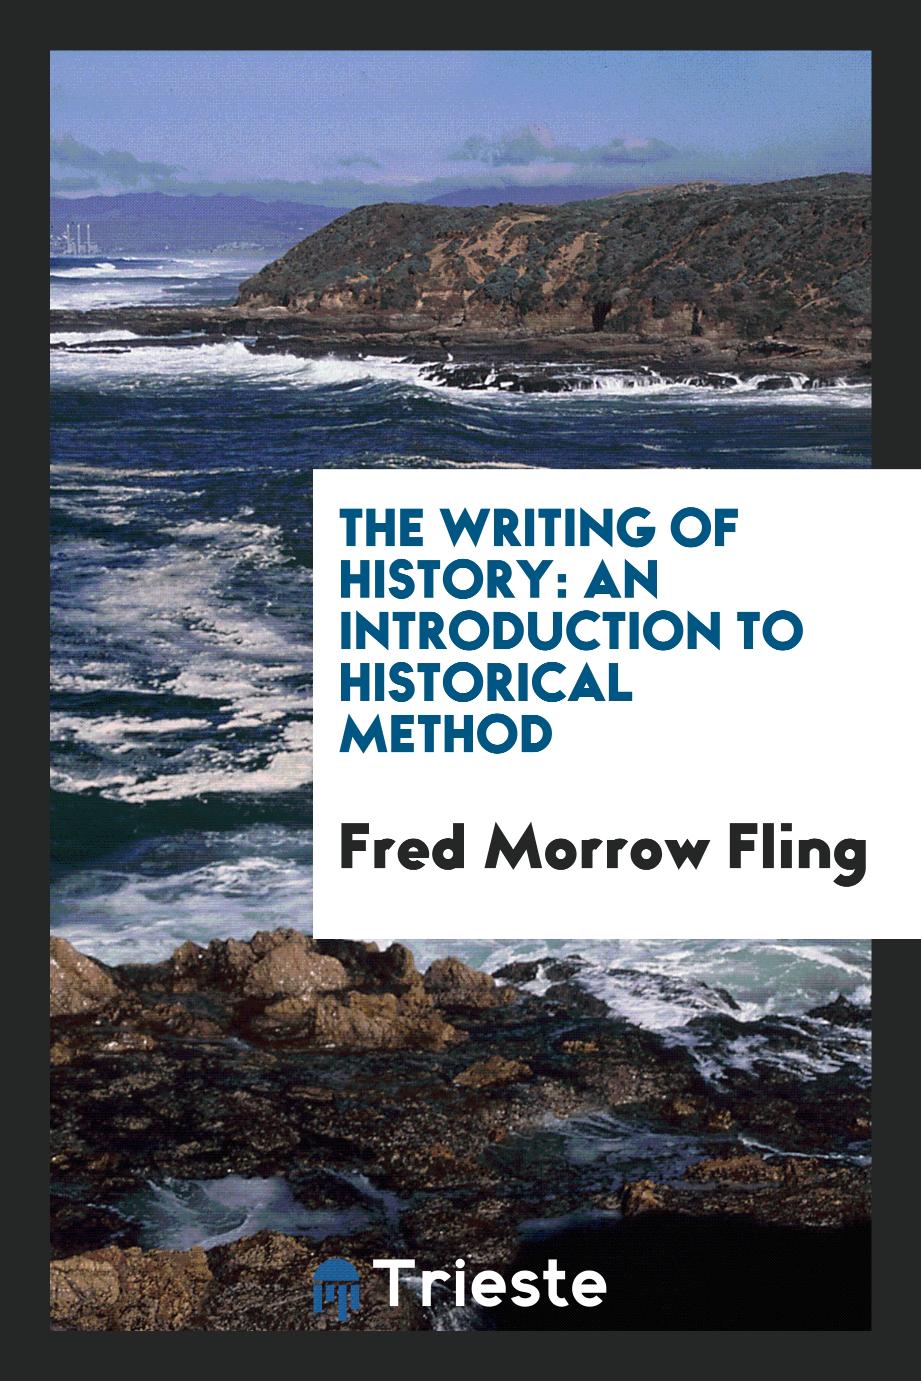 Fred Morrow Fling - The writing of history: an introduction to historical method